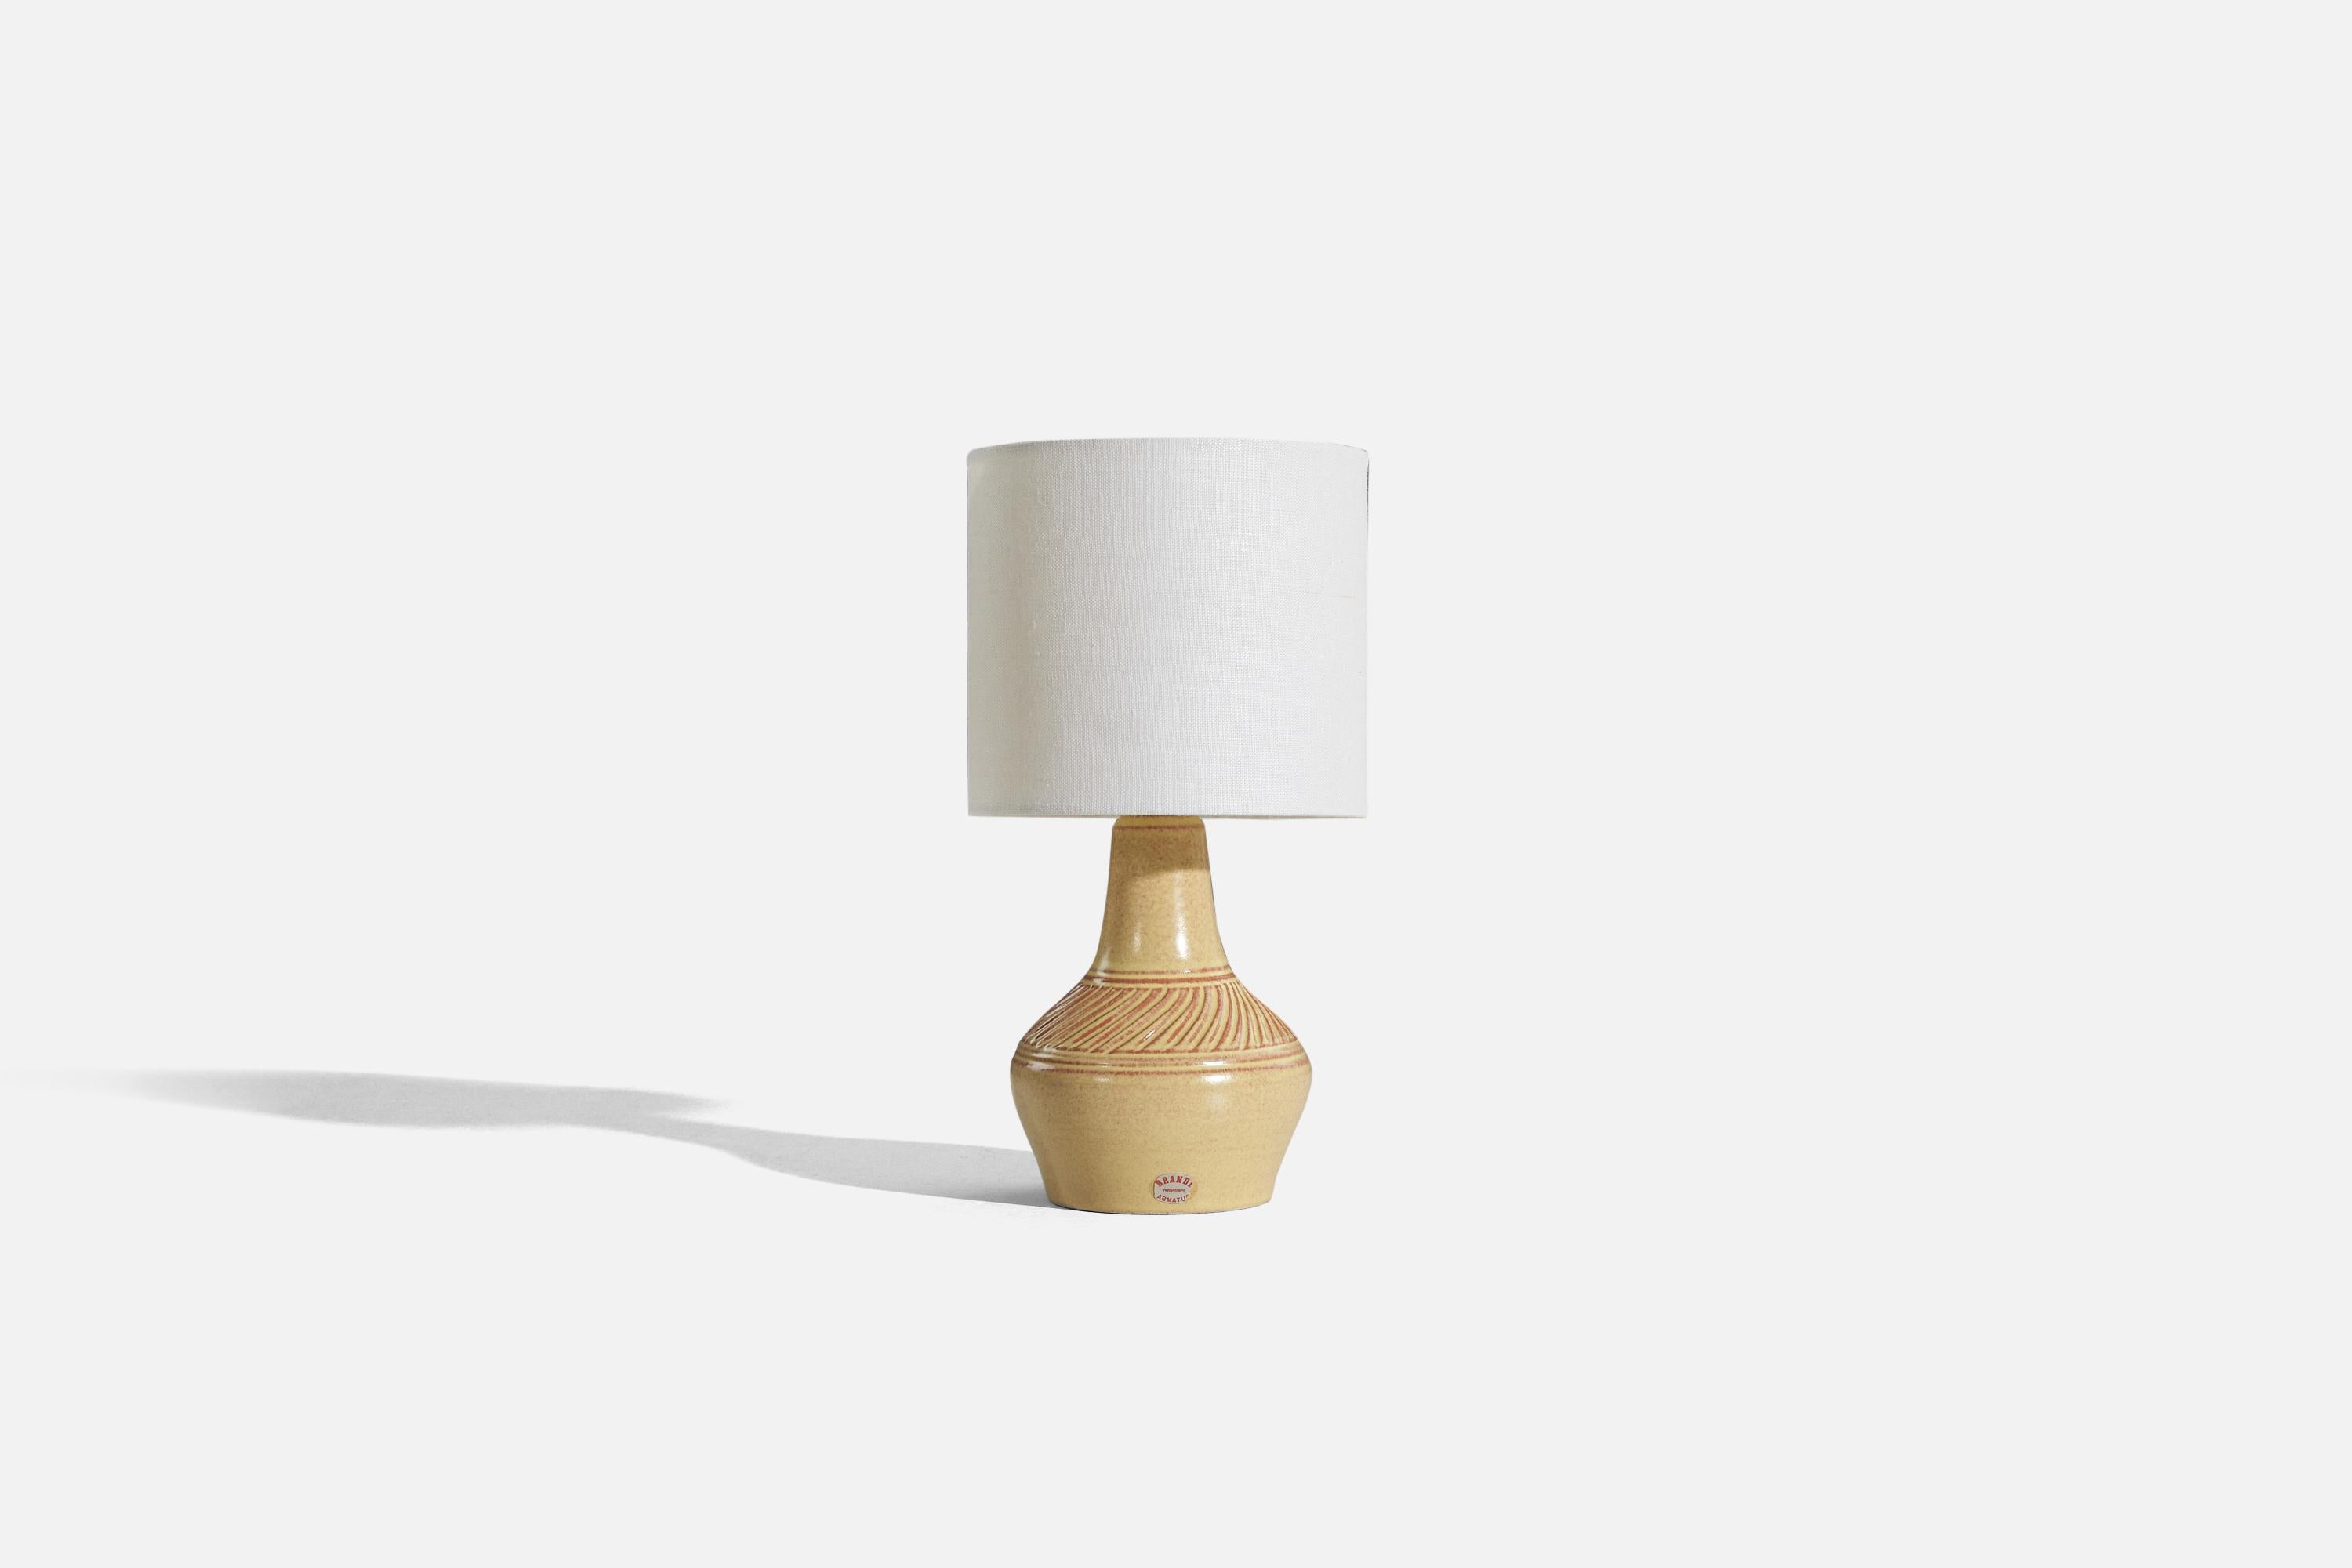 A cream-glazed stoneware table lamp designed by Henry Brandi and produced by his own firm, Brandi Vejbystrand, Sweden, 1960s. 

Sold without lampshade. 
Dimensions of Lamp (inches) : 8.1875 x 4.5 x 4.5 (H x W x D)
Dimensions of Shade (inches) : 6 x